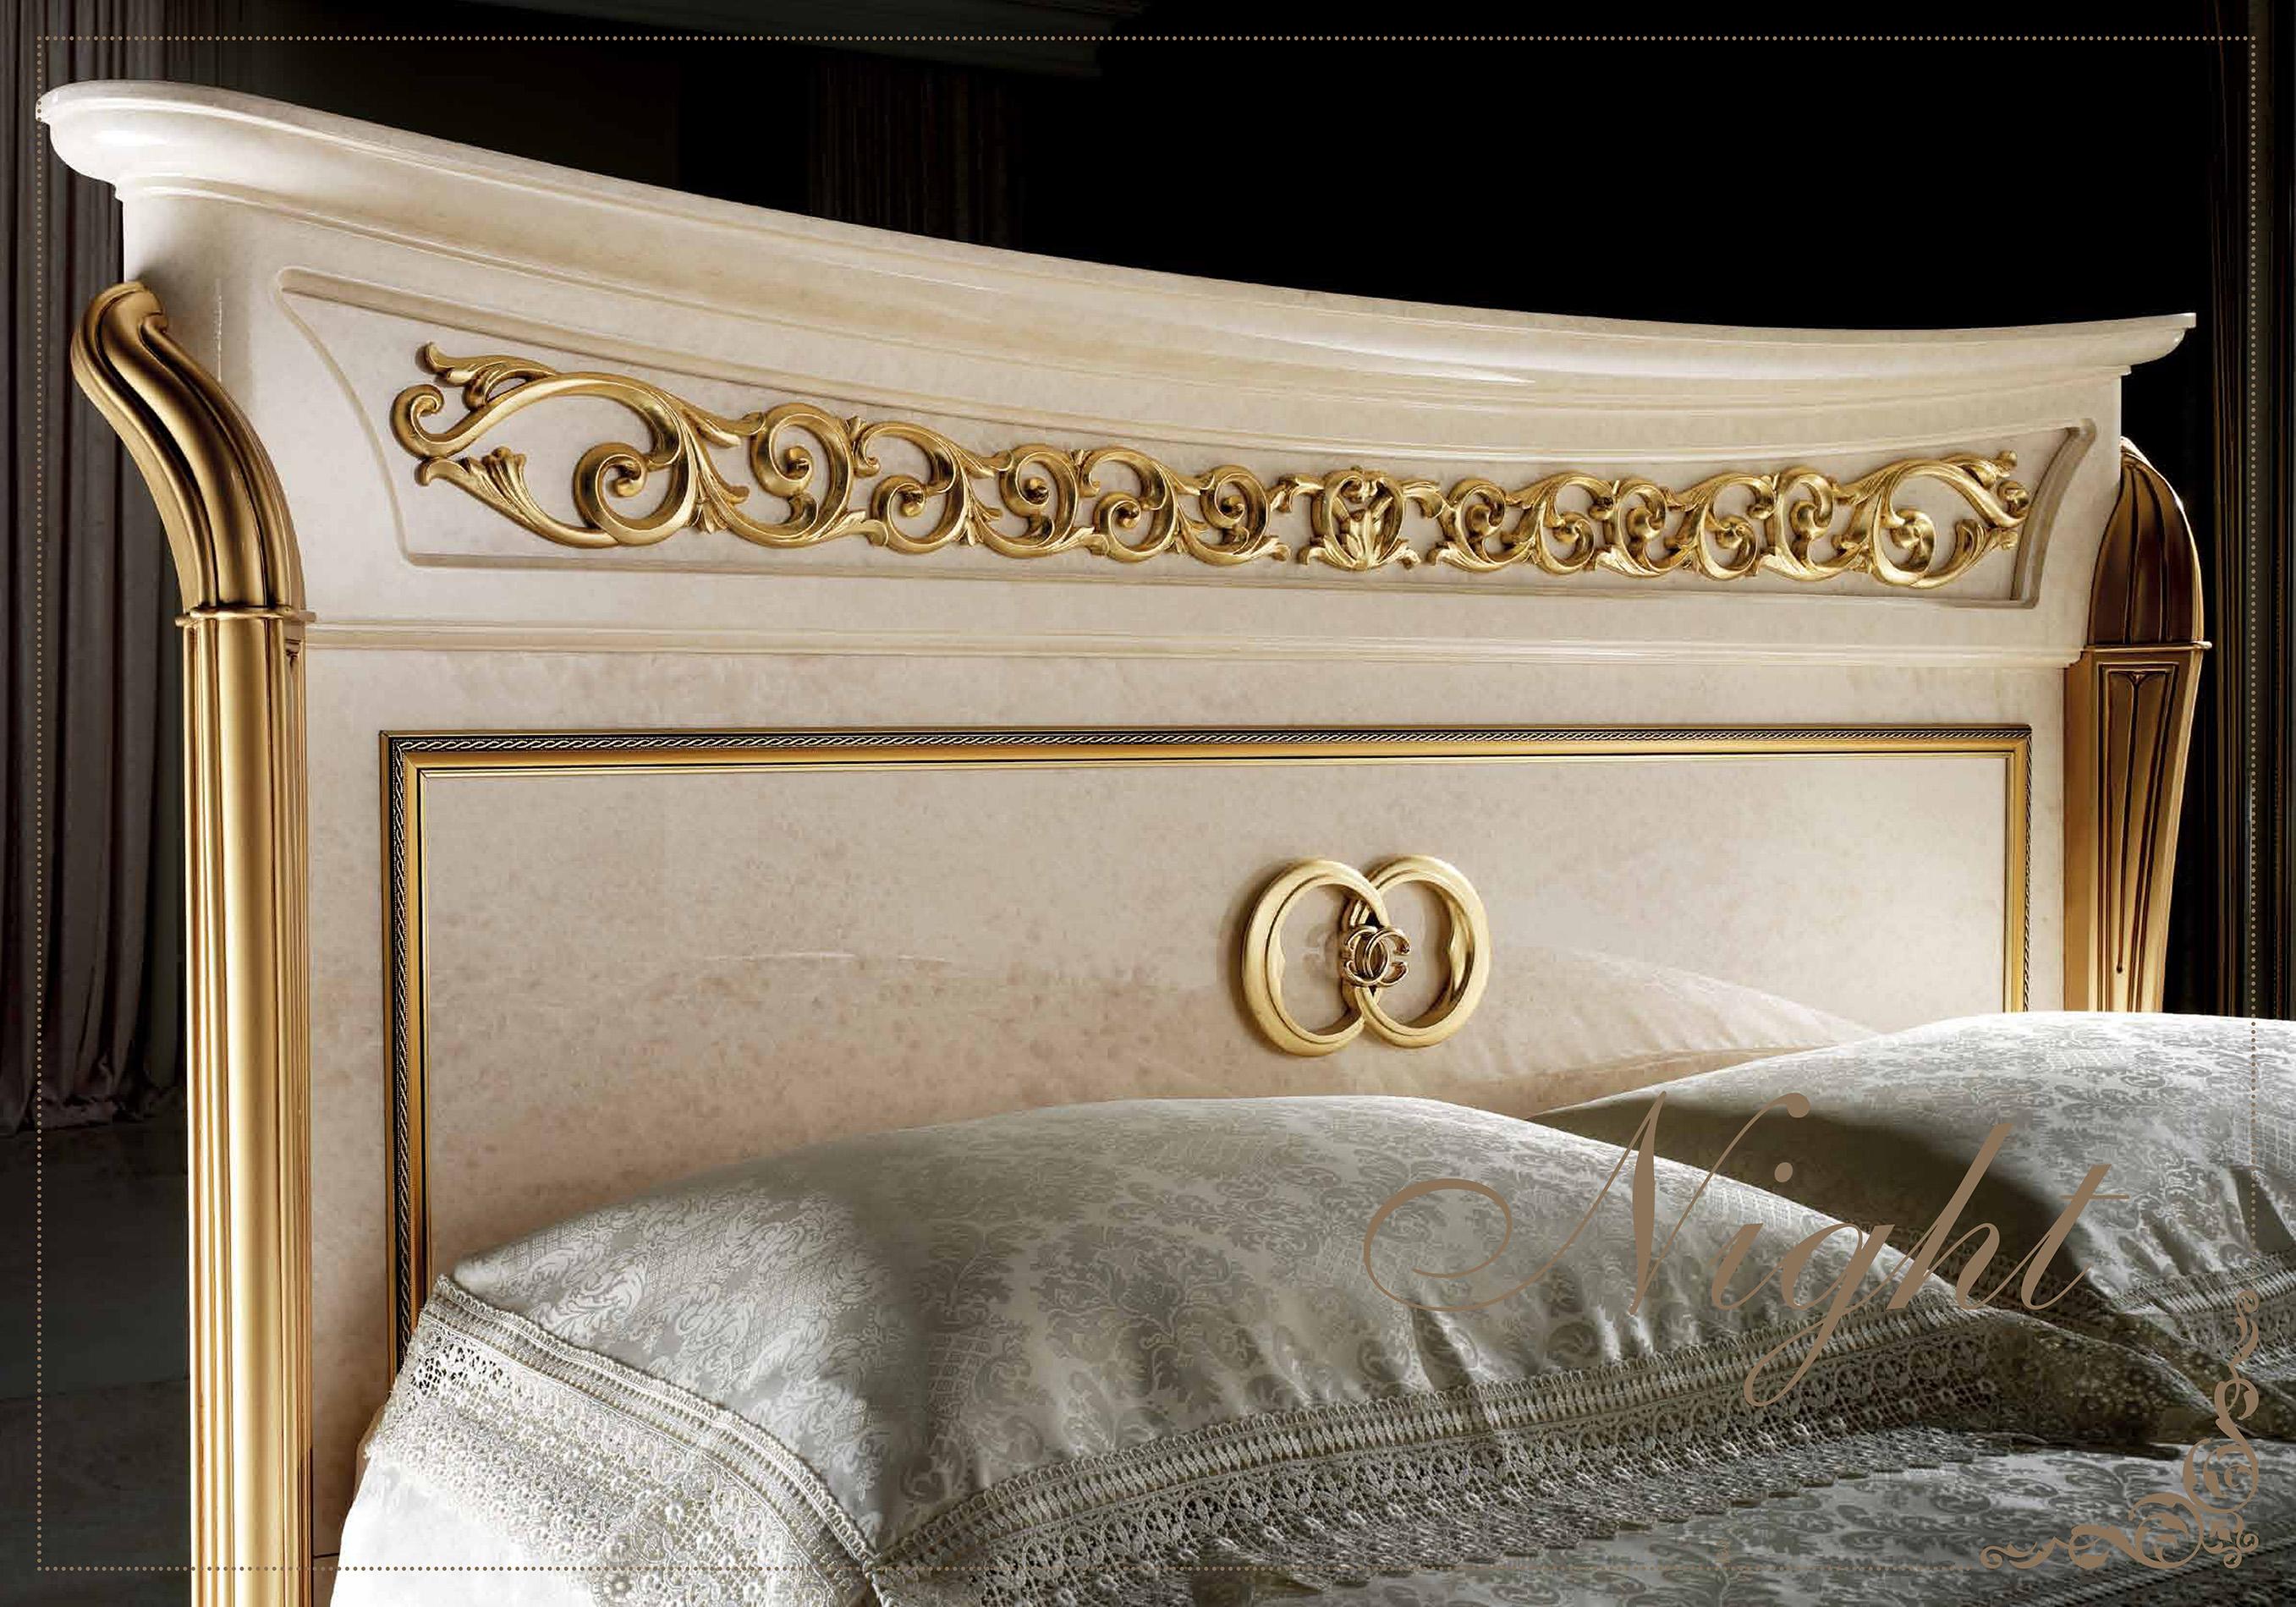 

    
Luxury Ivory & Carved Gold King Bedroom Set 3 Melodia ESF Made in Italy Classic
